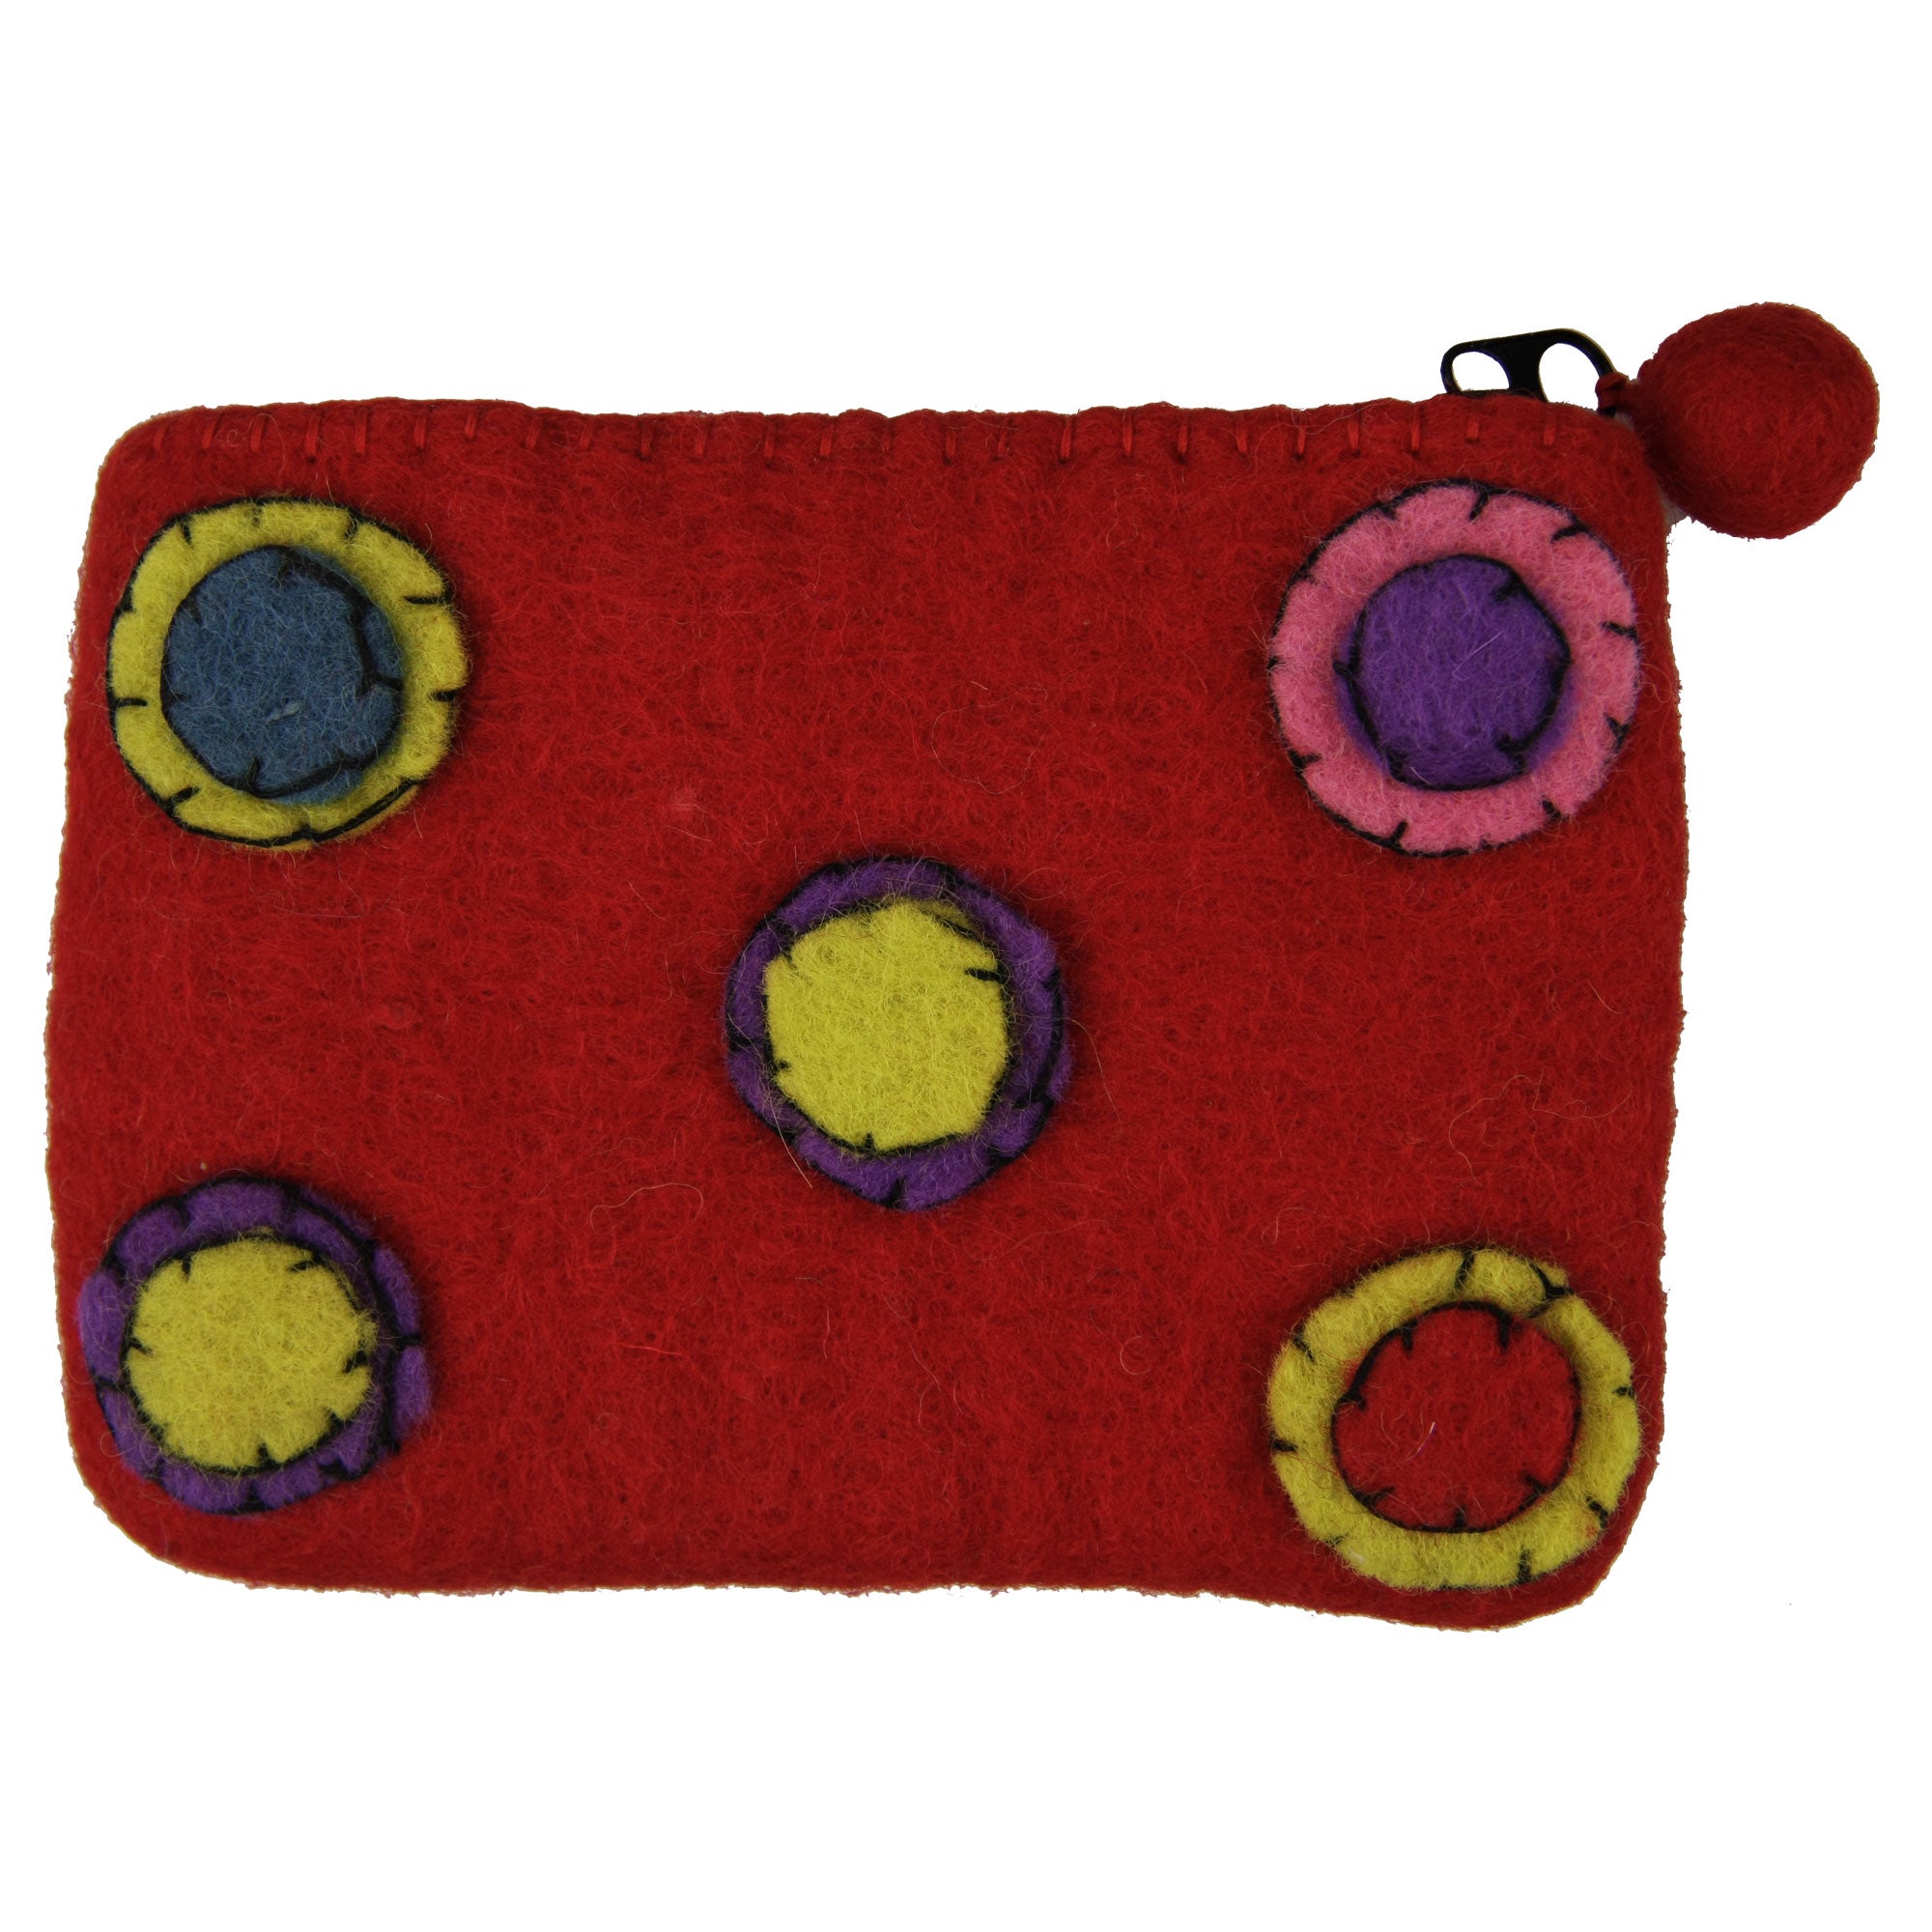 Wheel Of Good Fortune Felt Pouch - Red